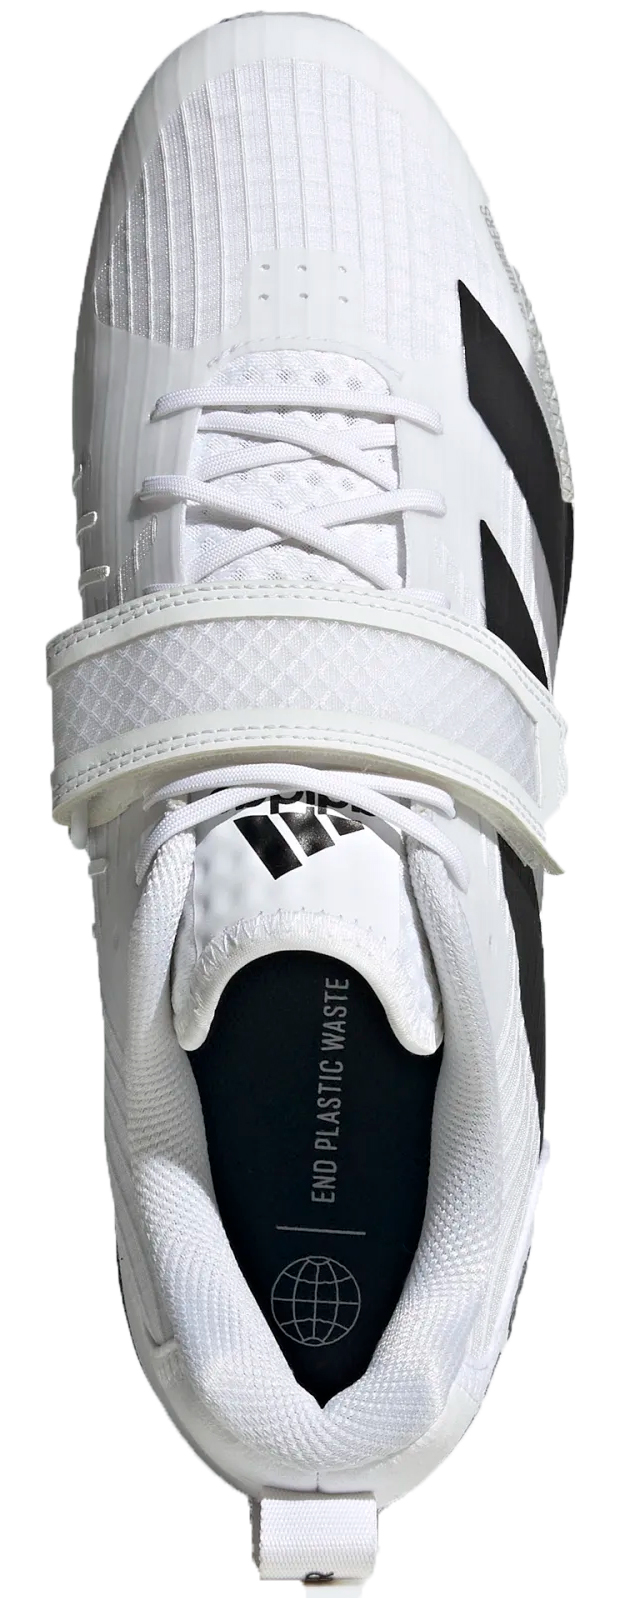 Chaussures d'haltérophilie adidas Adipower 3 - adidas - Marques - Lifestyle